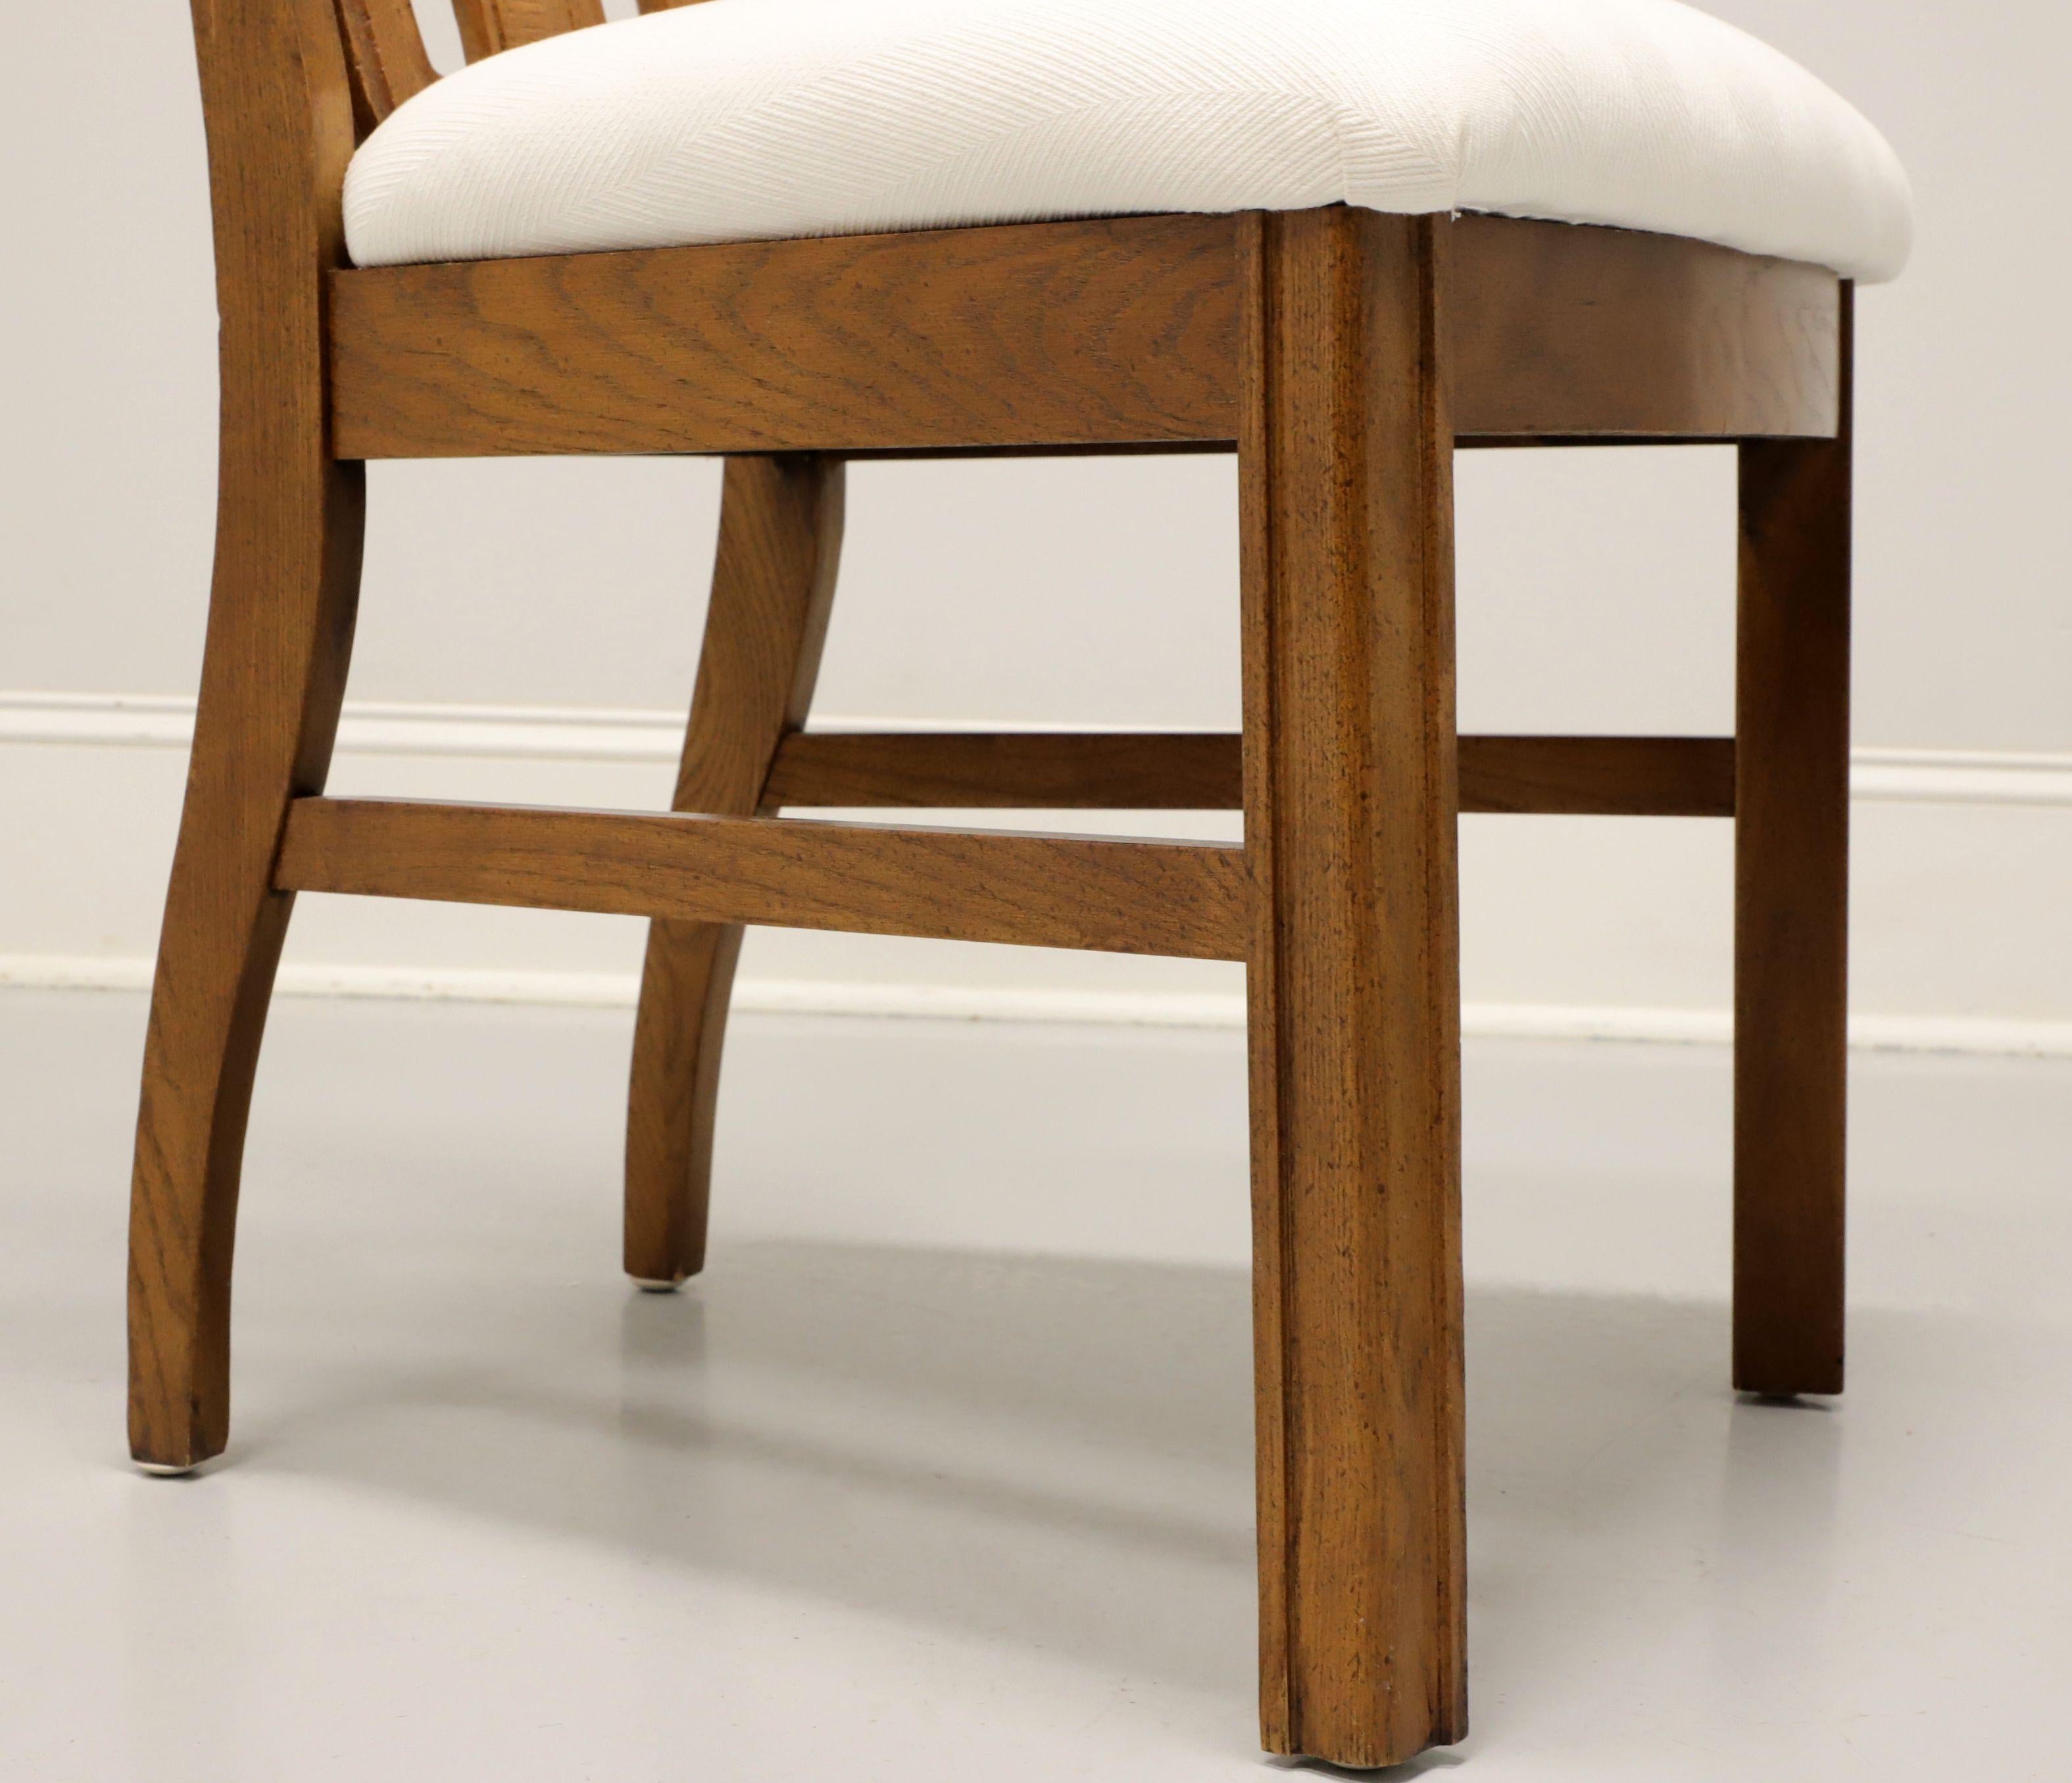 BROYHILL PREMIER Mid 20th Century Oak Brutalist Style Dining Side Chairs -Pair B For Sale 4